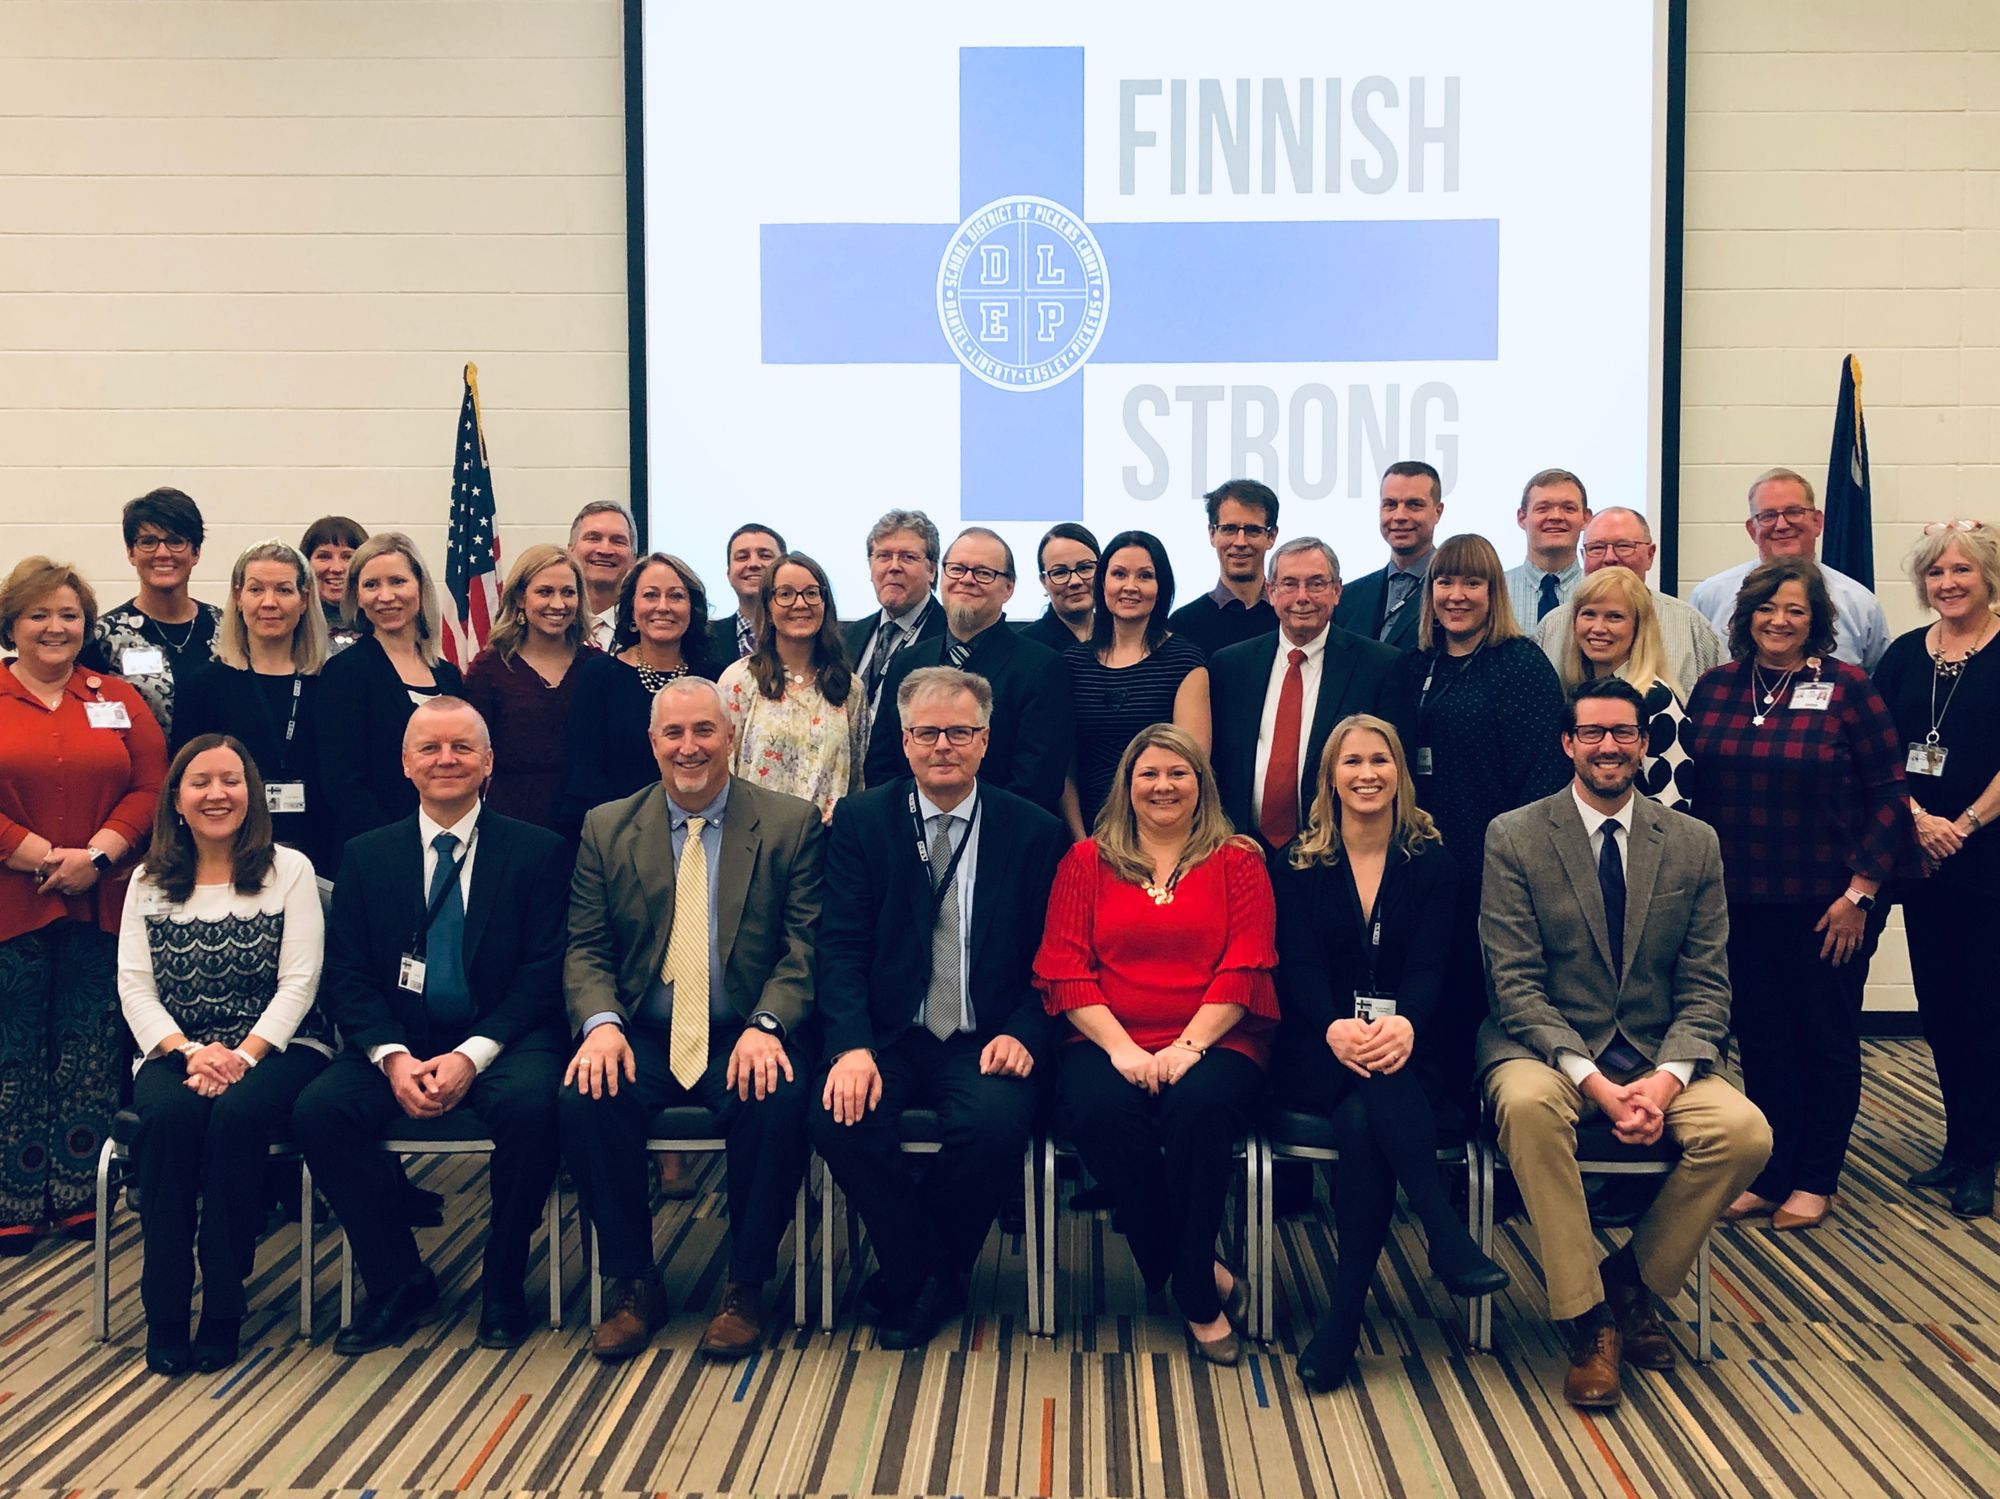 Group Photo of SDPC and Finnish educators